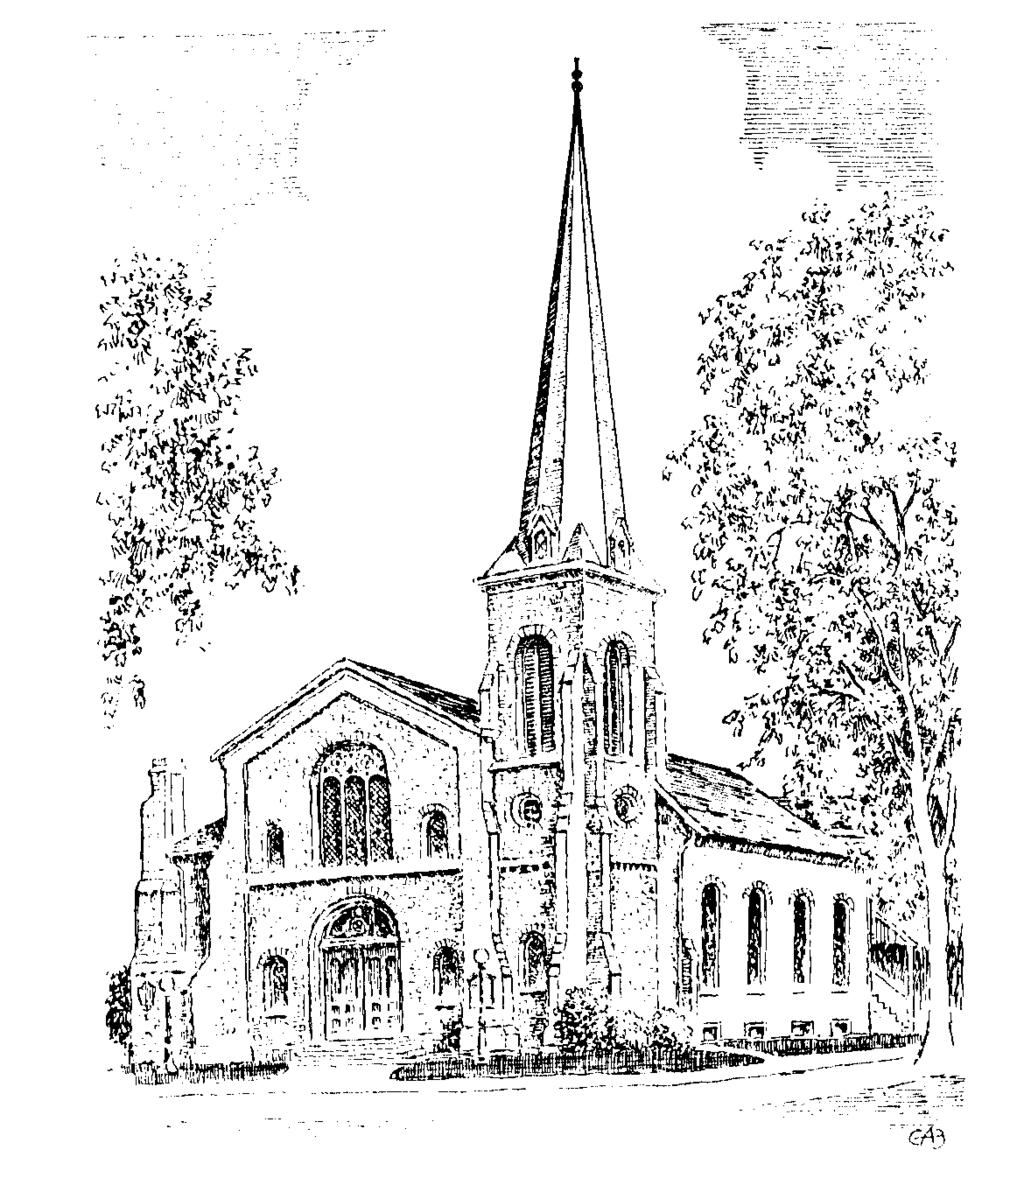 CORNERS AT FIRST PRESBYTERIAN CHURCH MISSION SUPPORT FUND The Mission Support Fund was established May 15, 1996 with monies from a bequest from Sylvia Pierce Brown and memorial monies from family and